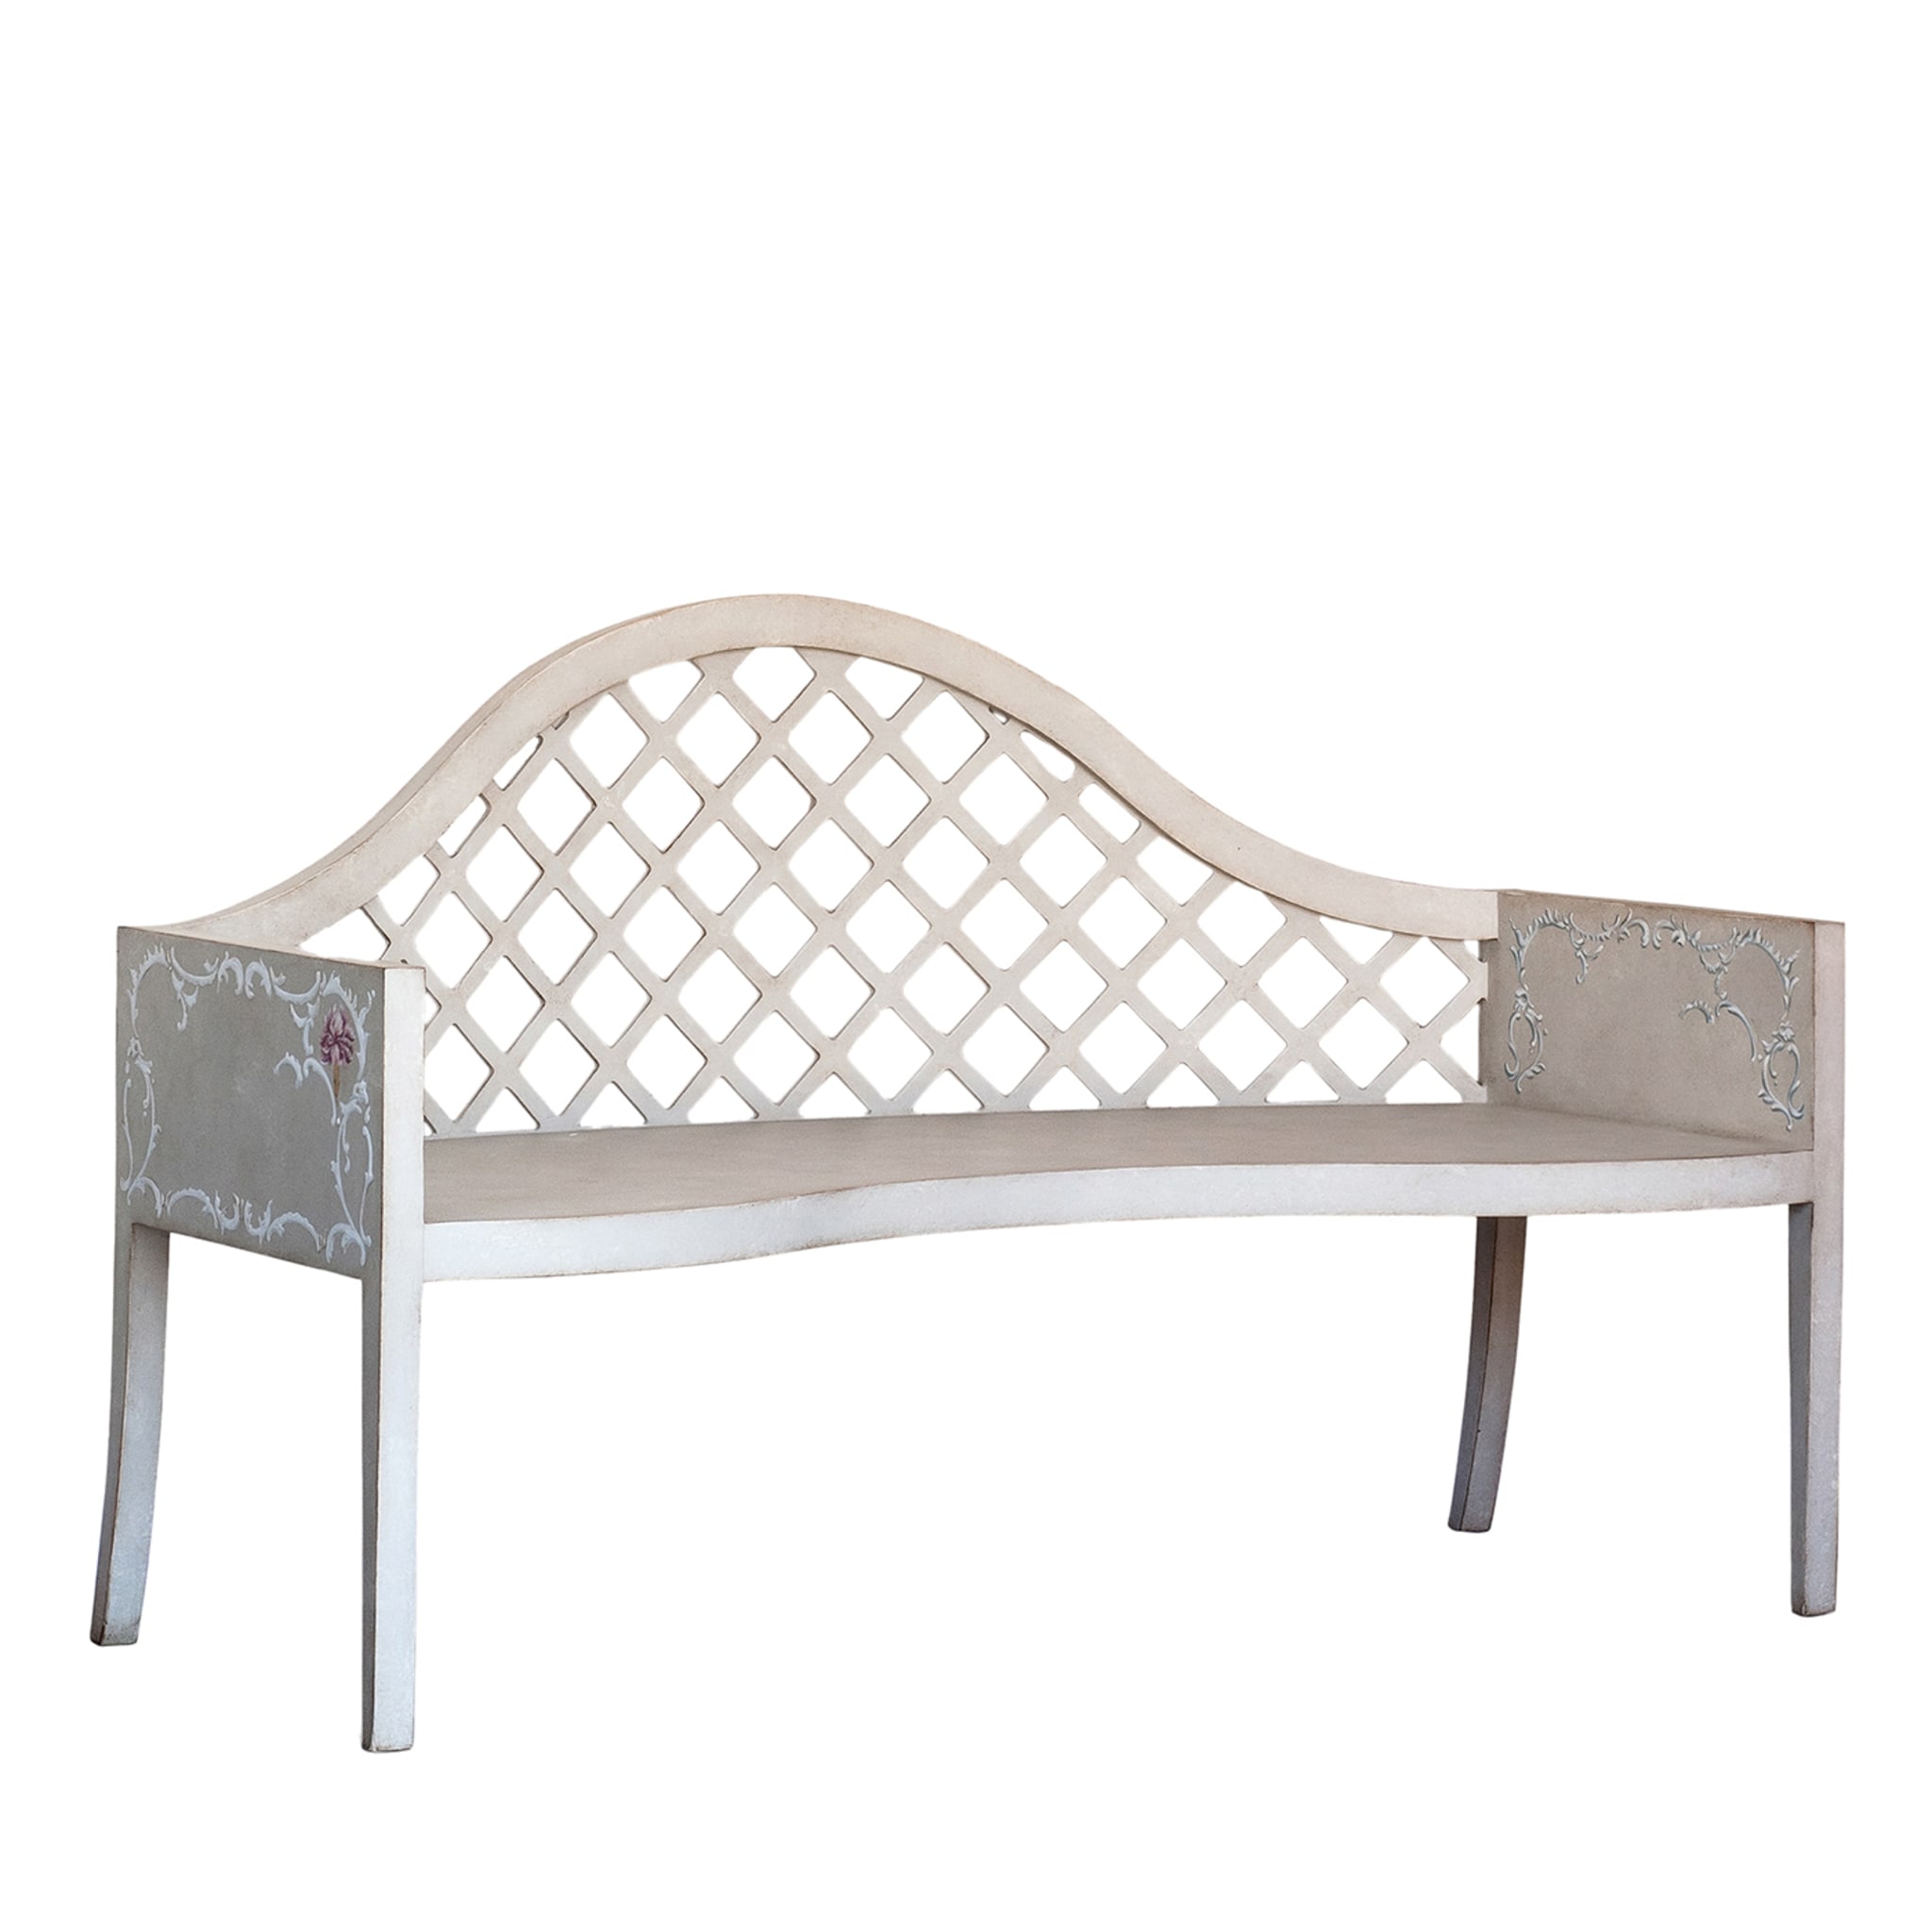 Lavaredo Settee Textural White and Tulips Decors Bench - Main view